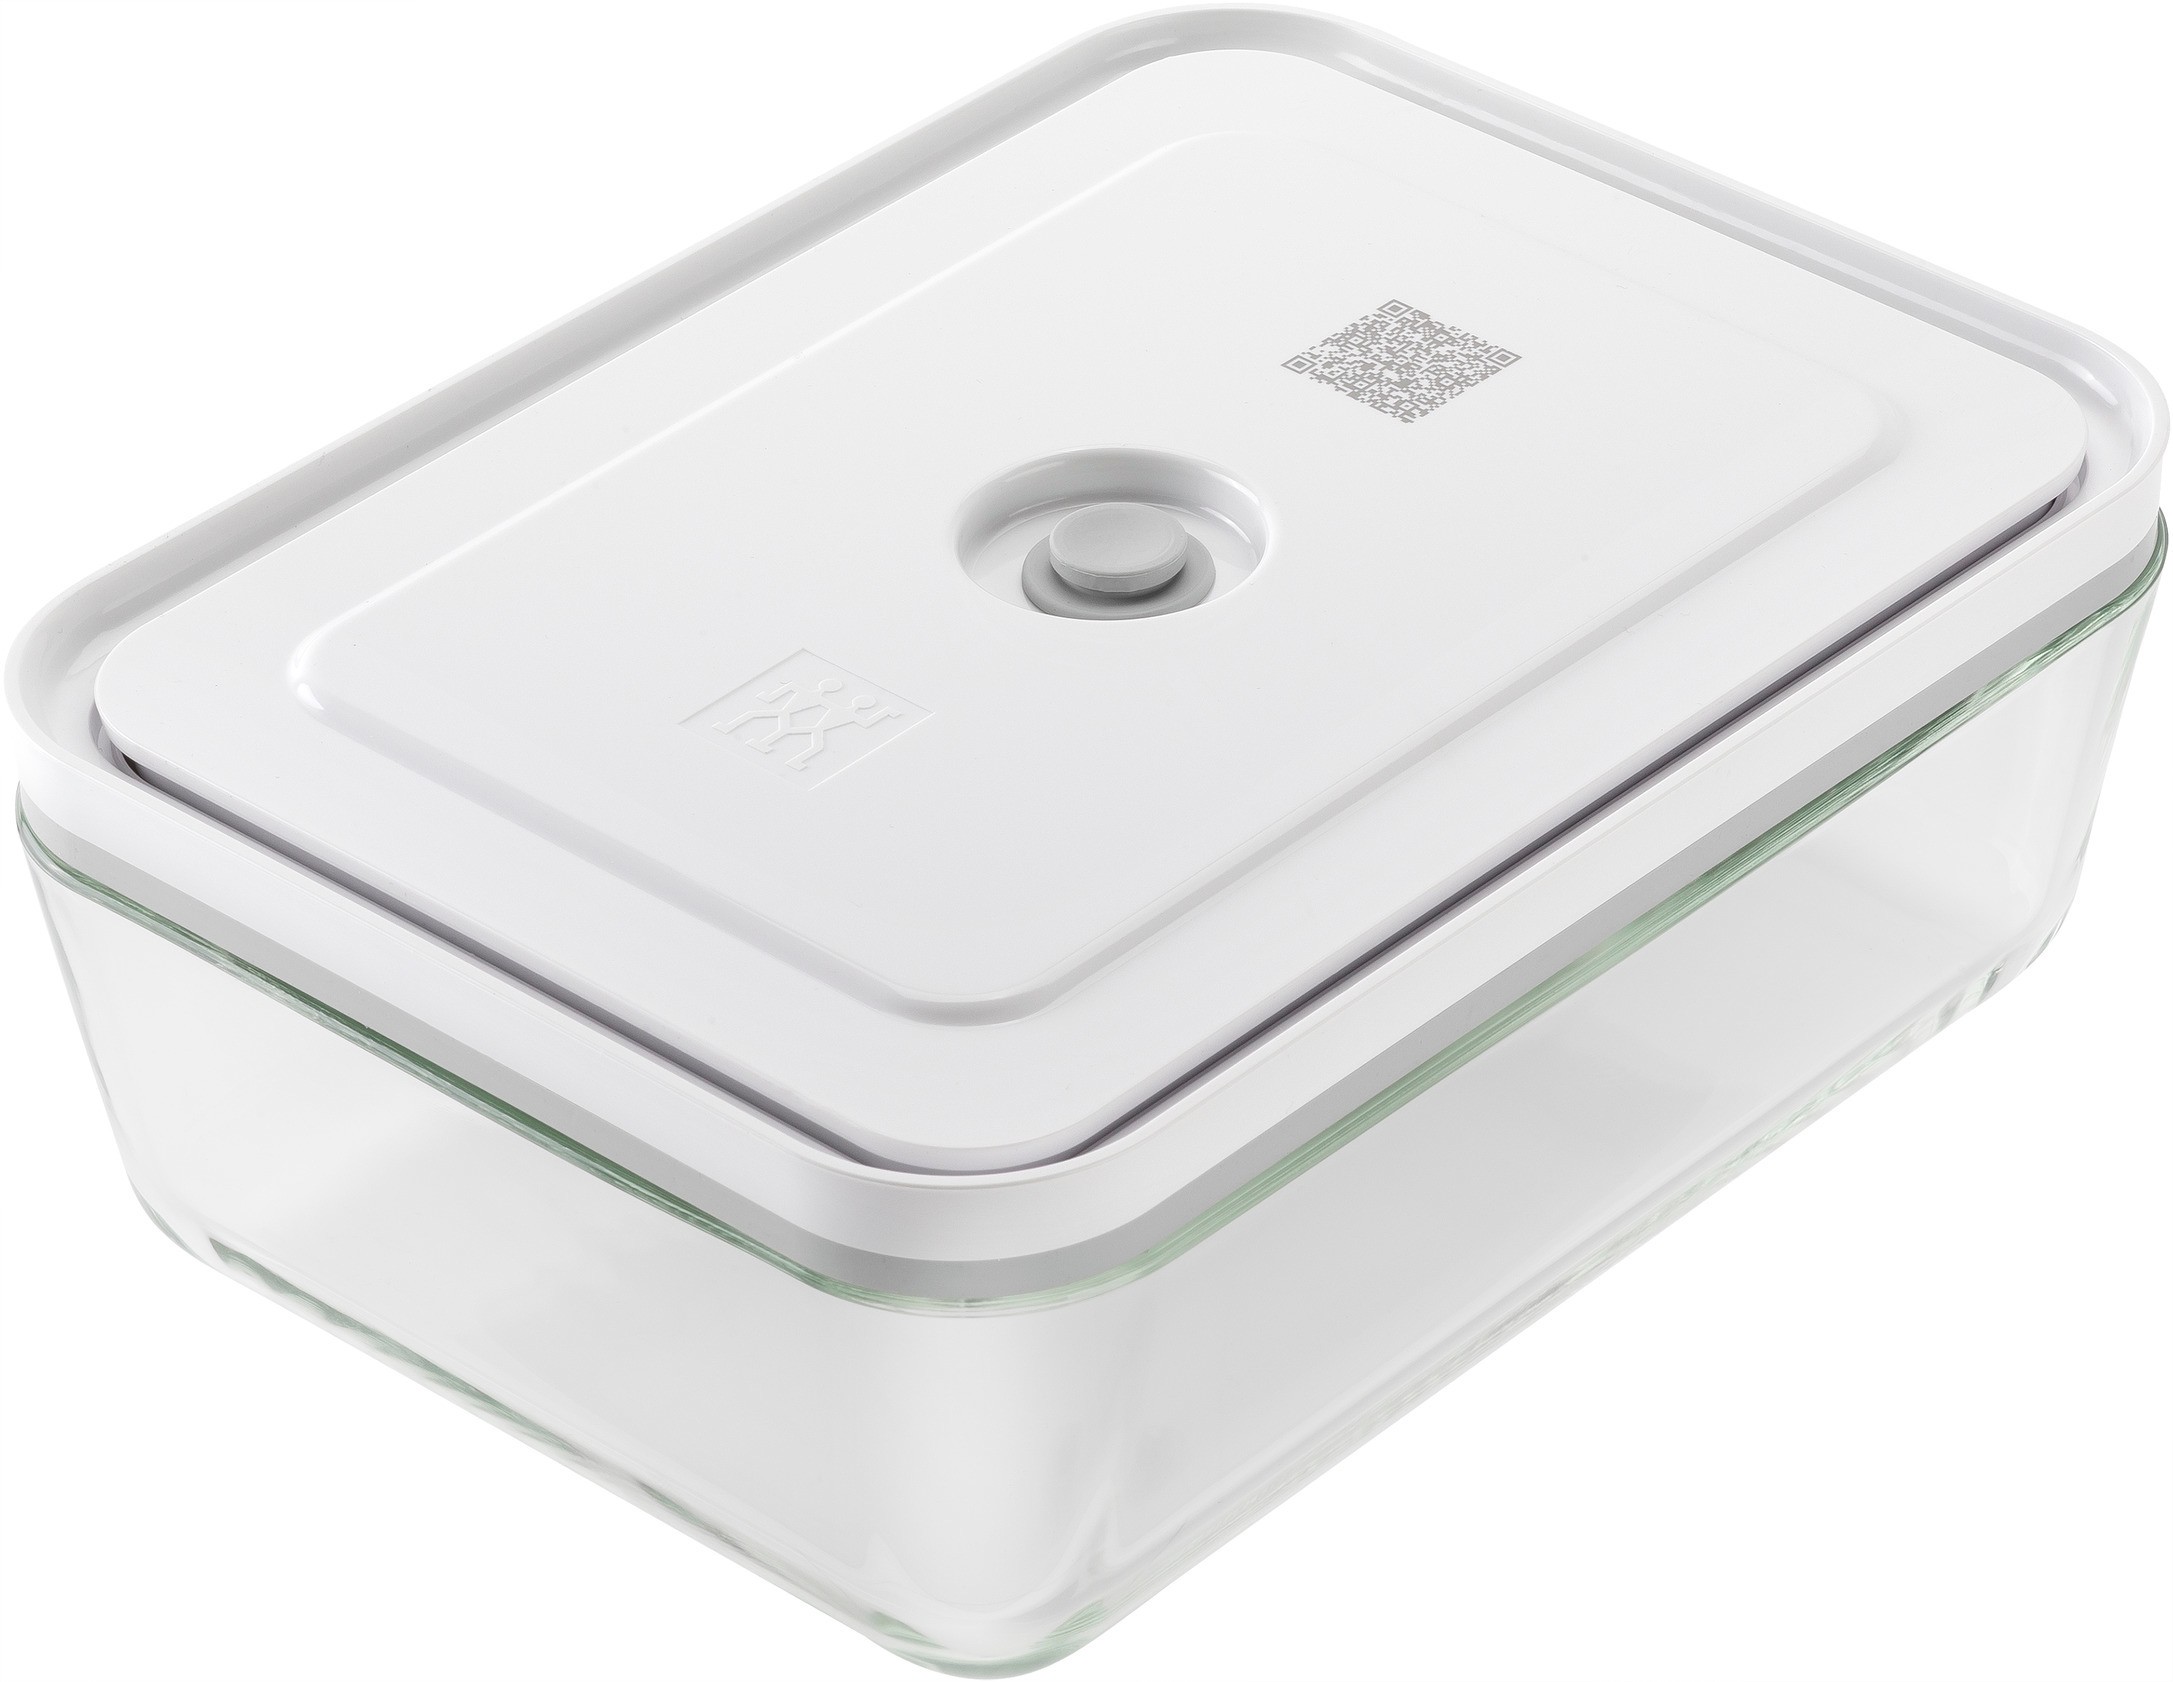 Buy the Zwilling Fresh and Save Food System - Vacuum Glass Gratin Dish 2.8 Litre online at smithsofloughton.com